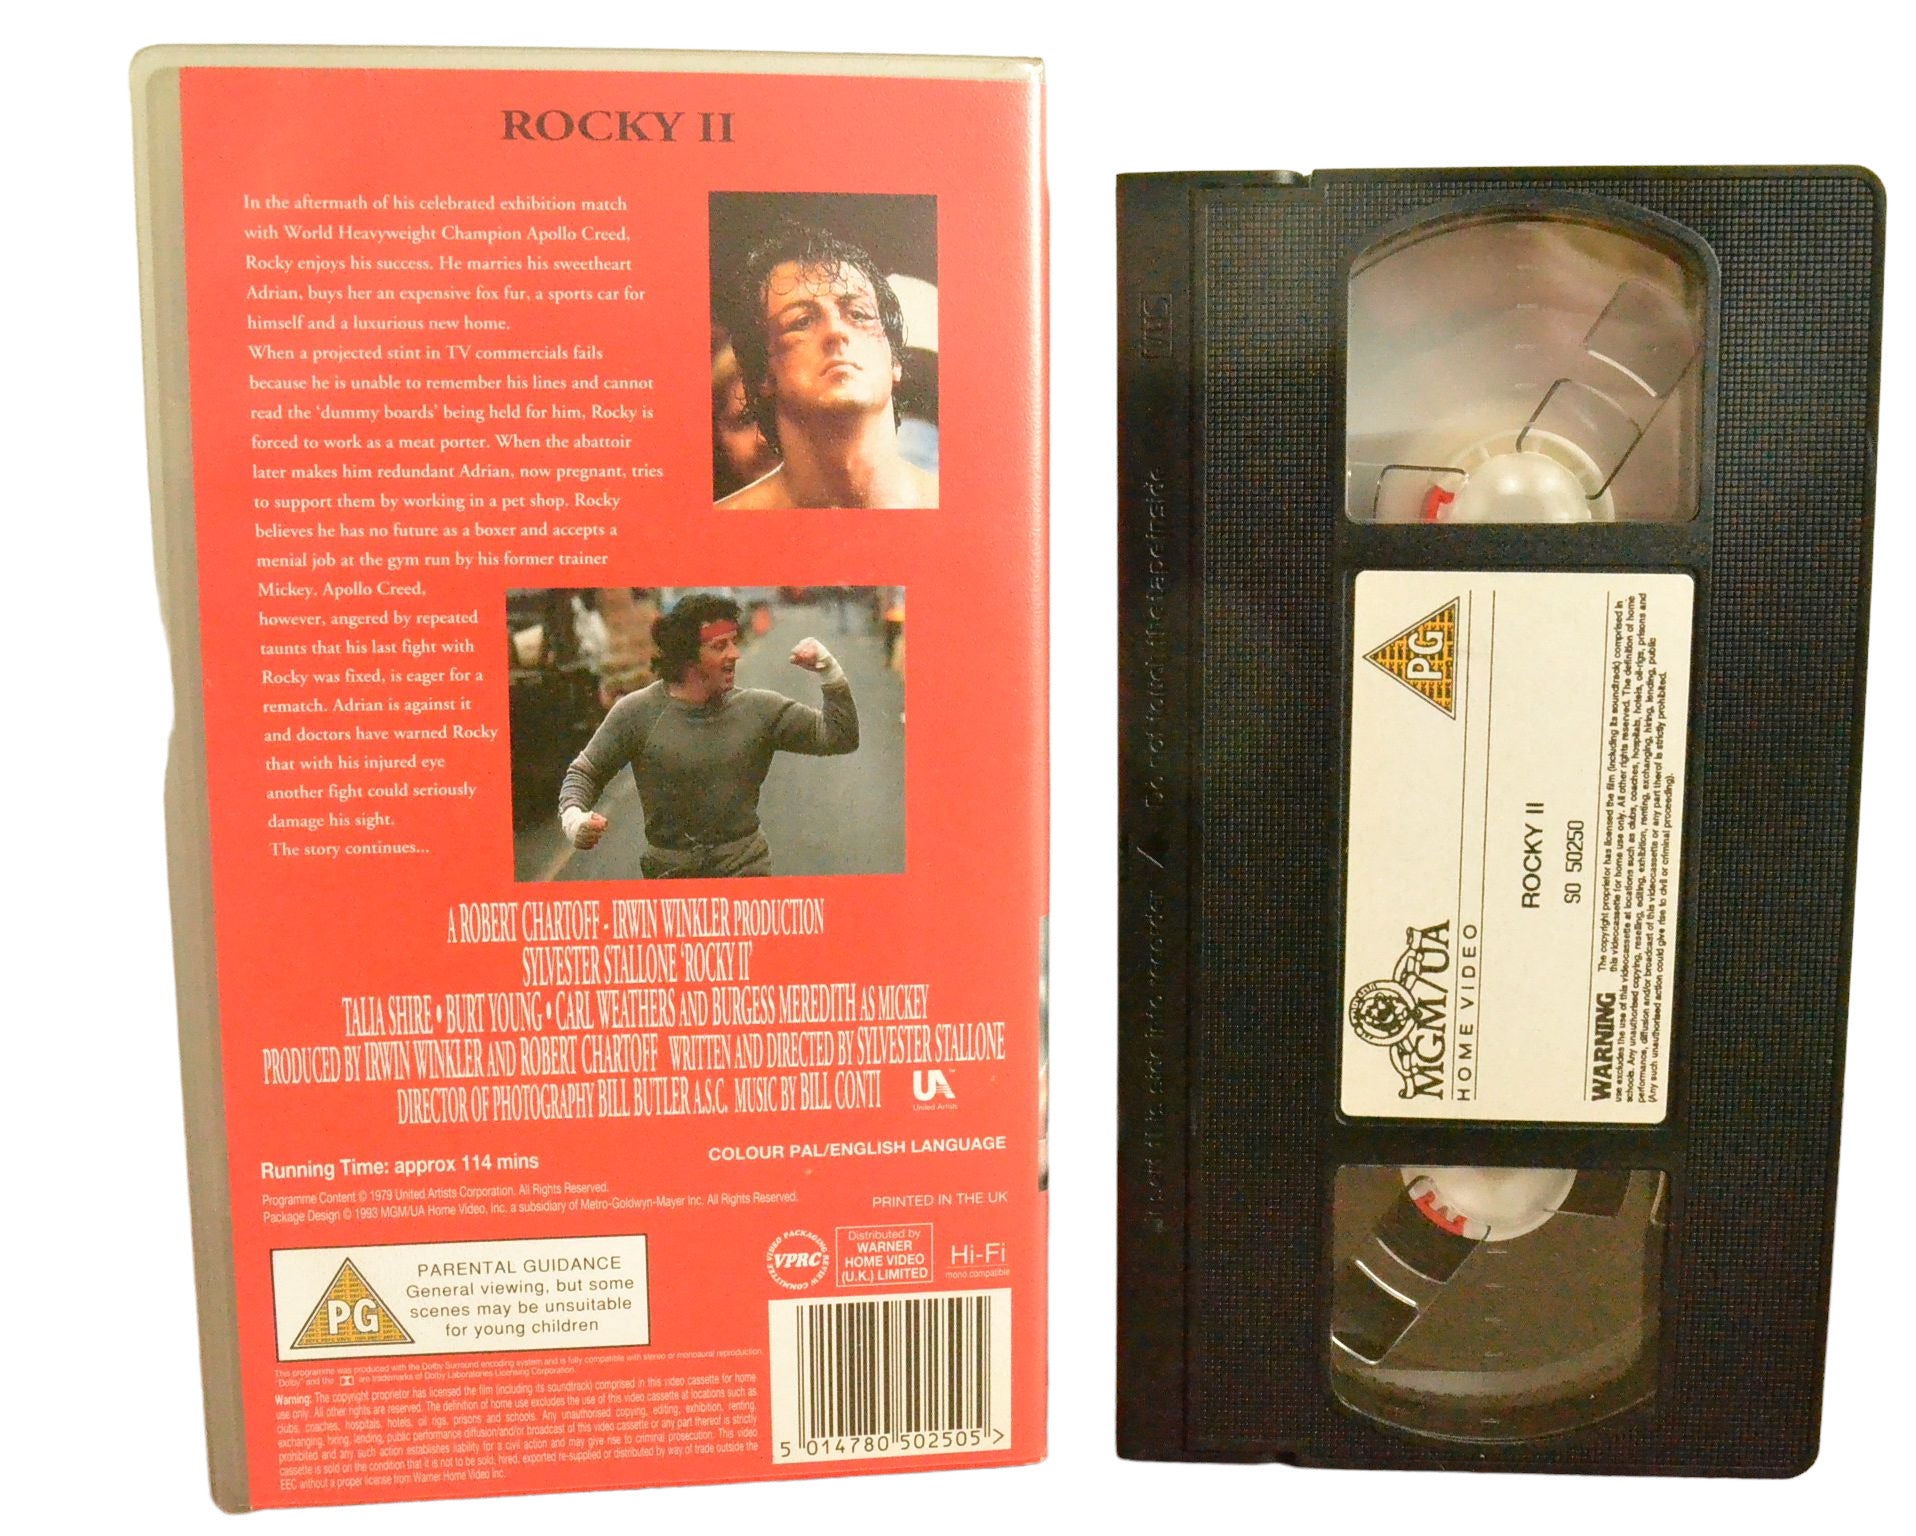 Rocky II - The Story Continues (Screen Classics) - Sylvester Stallone - MGM/UA Home Video - S050250 - Drama - Pal - VHS-